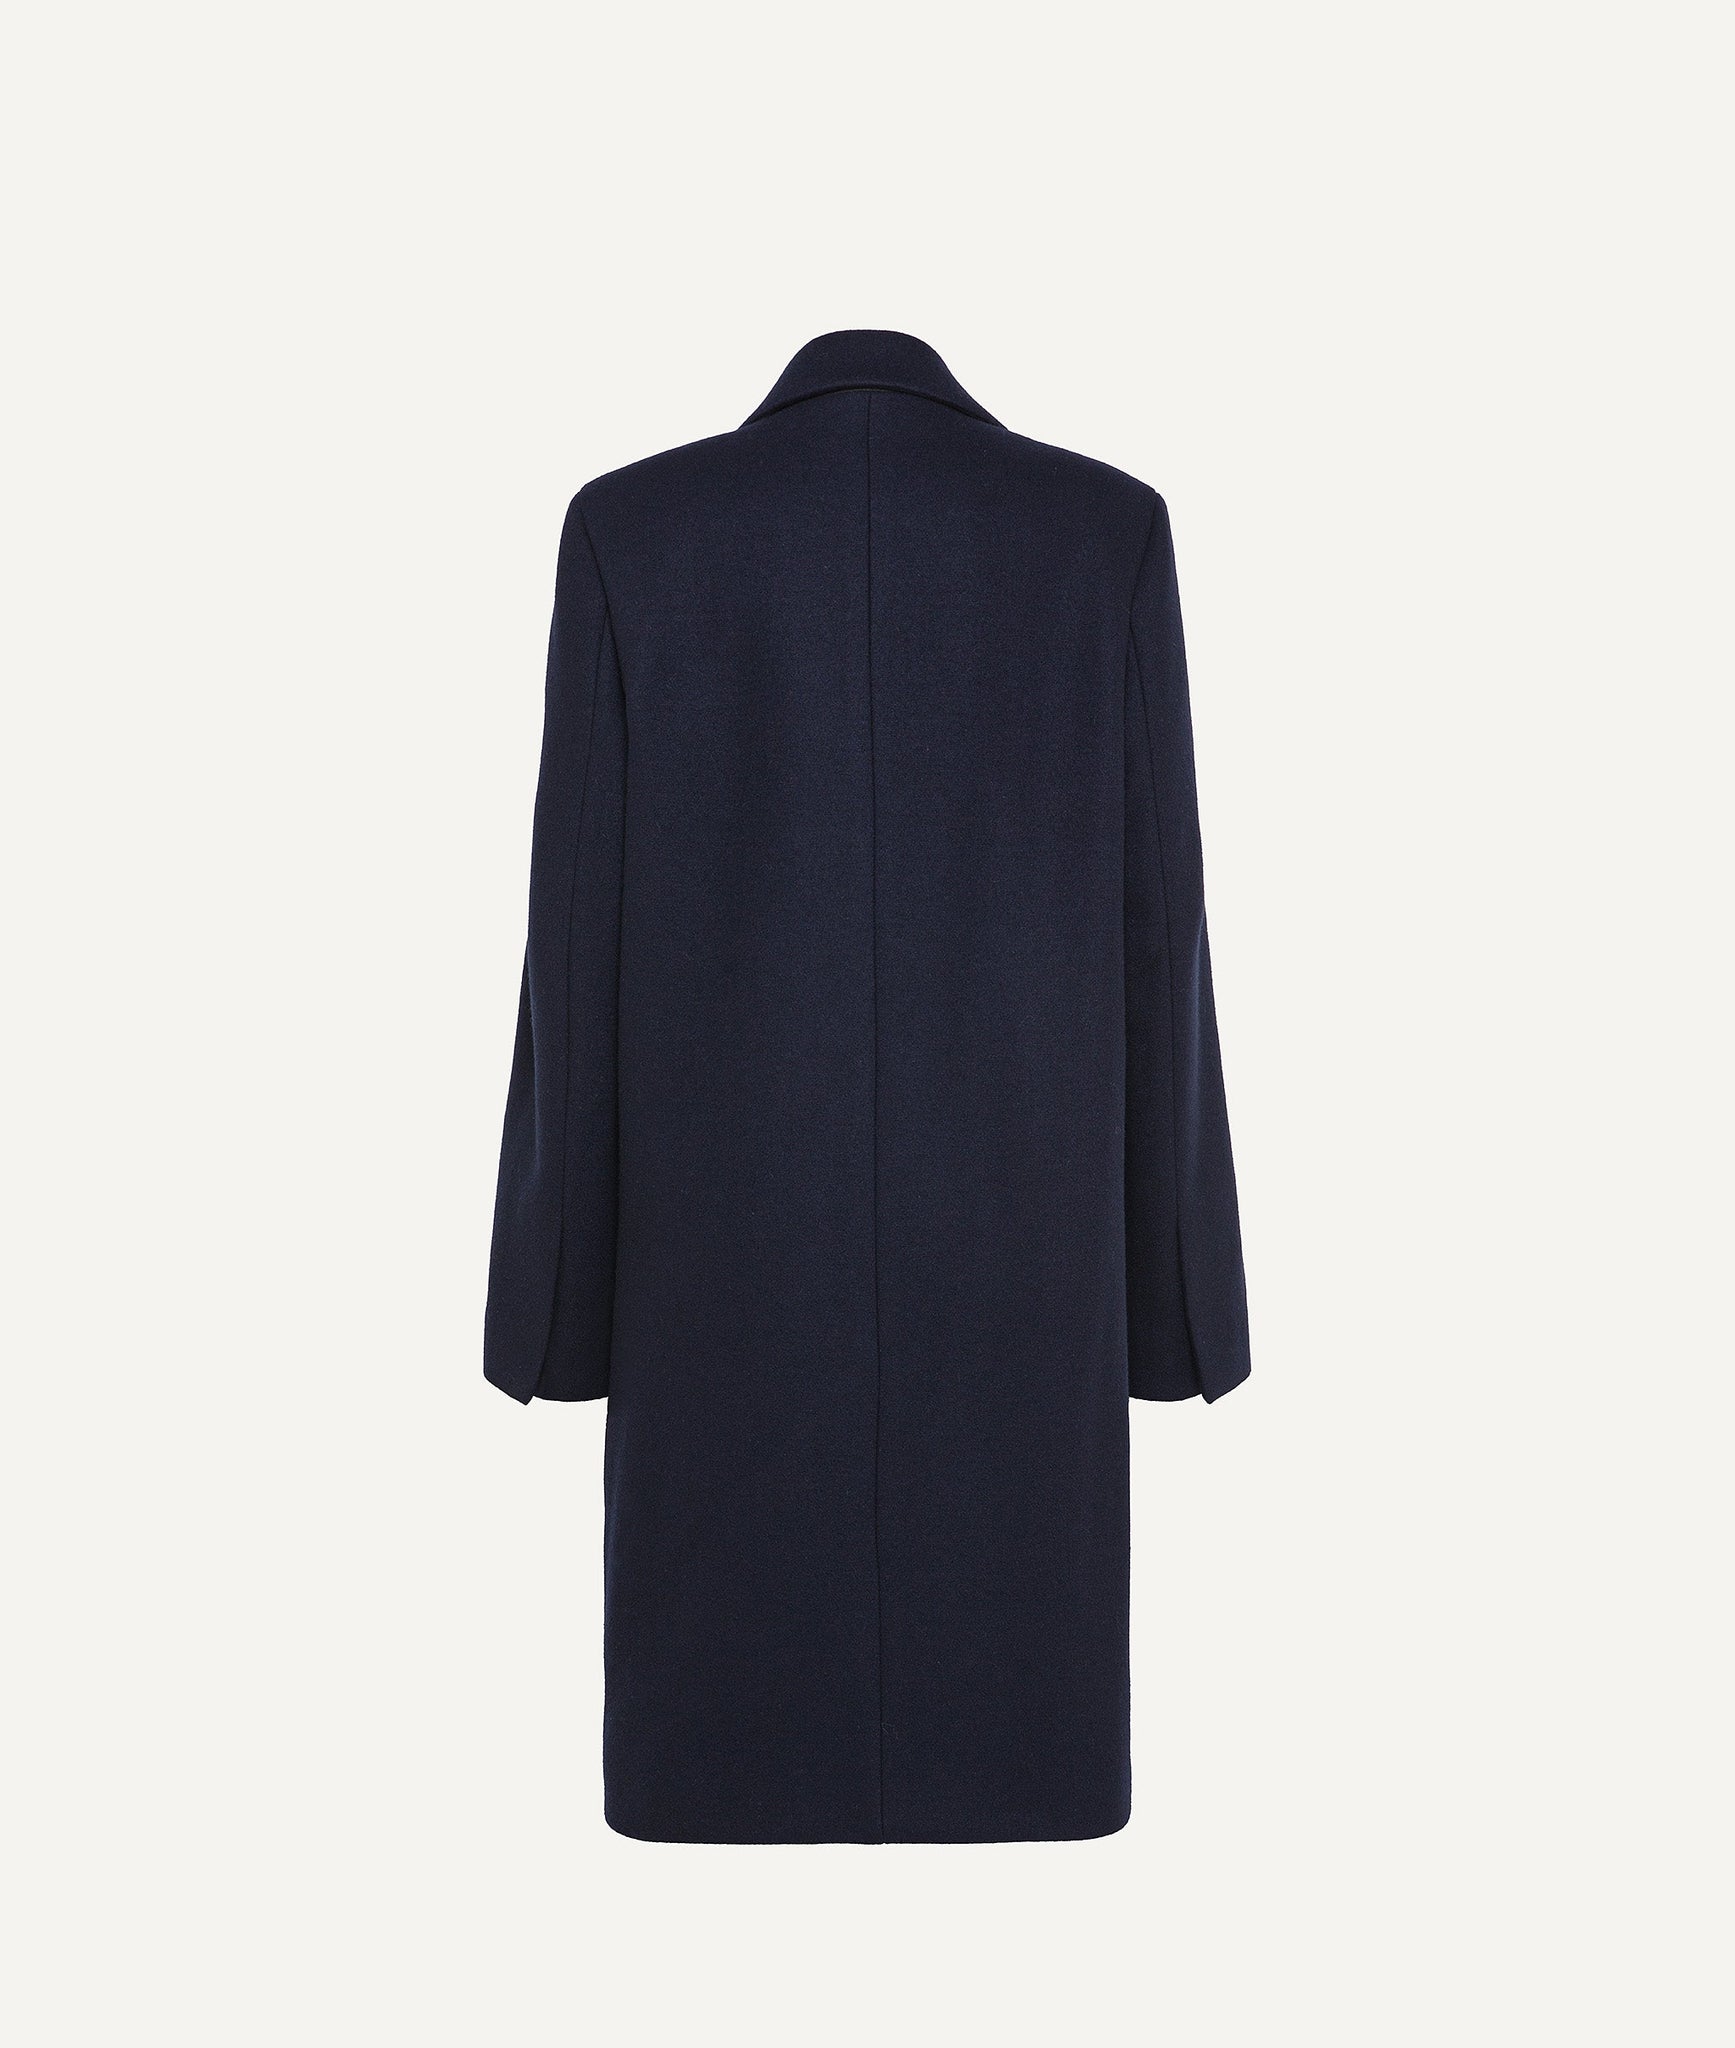 Eleventy - Double Breasted Coat in Wool